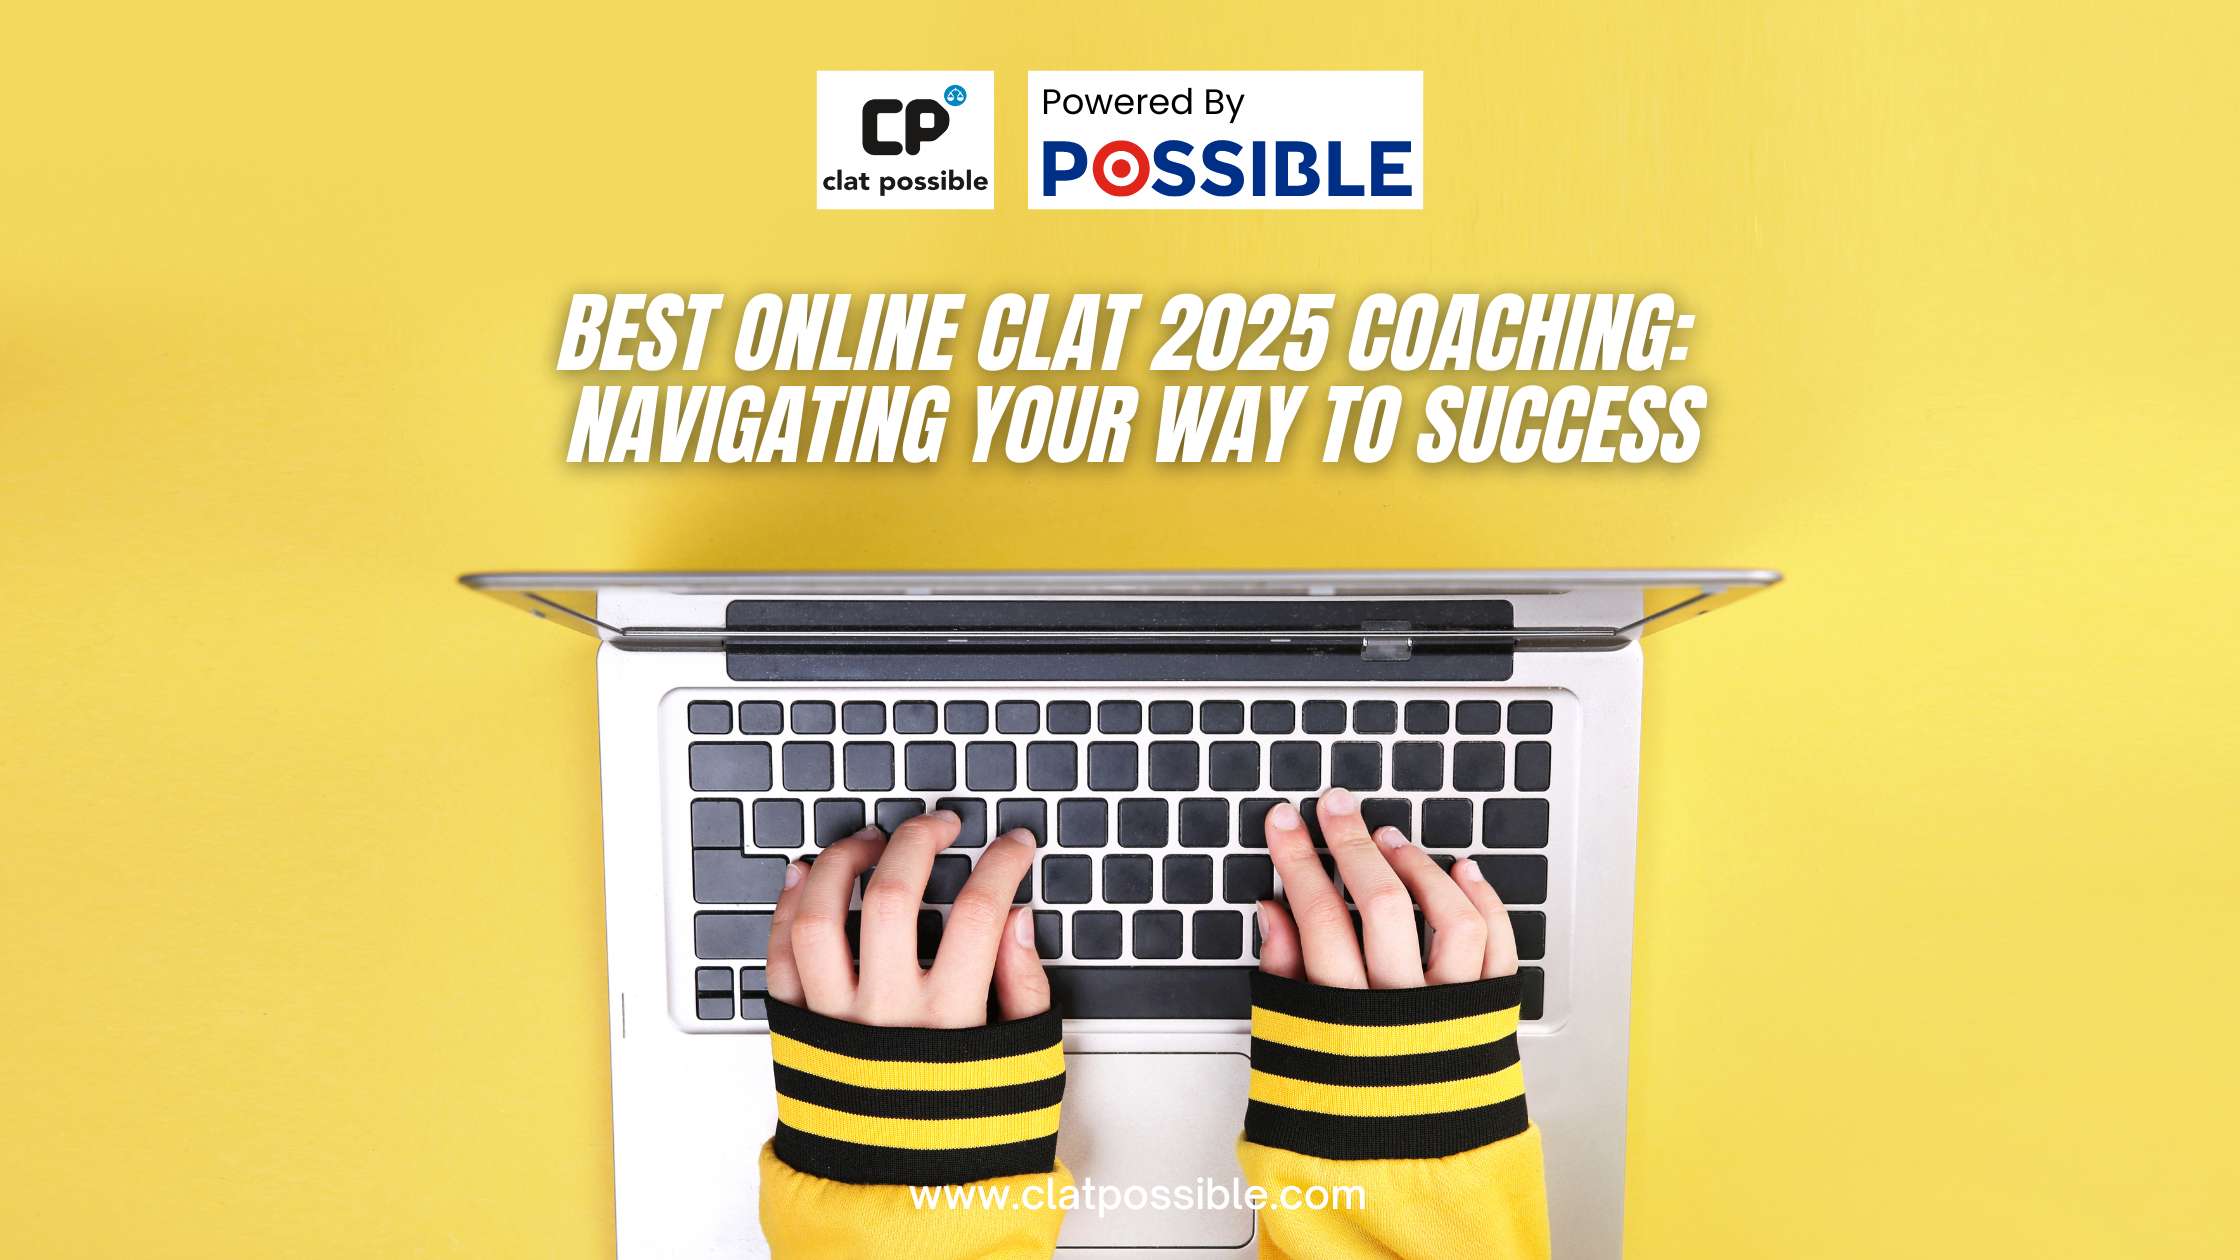 Best Online CLAT 2025 Coaching: Navigating Your Way to Success